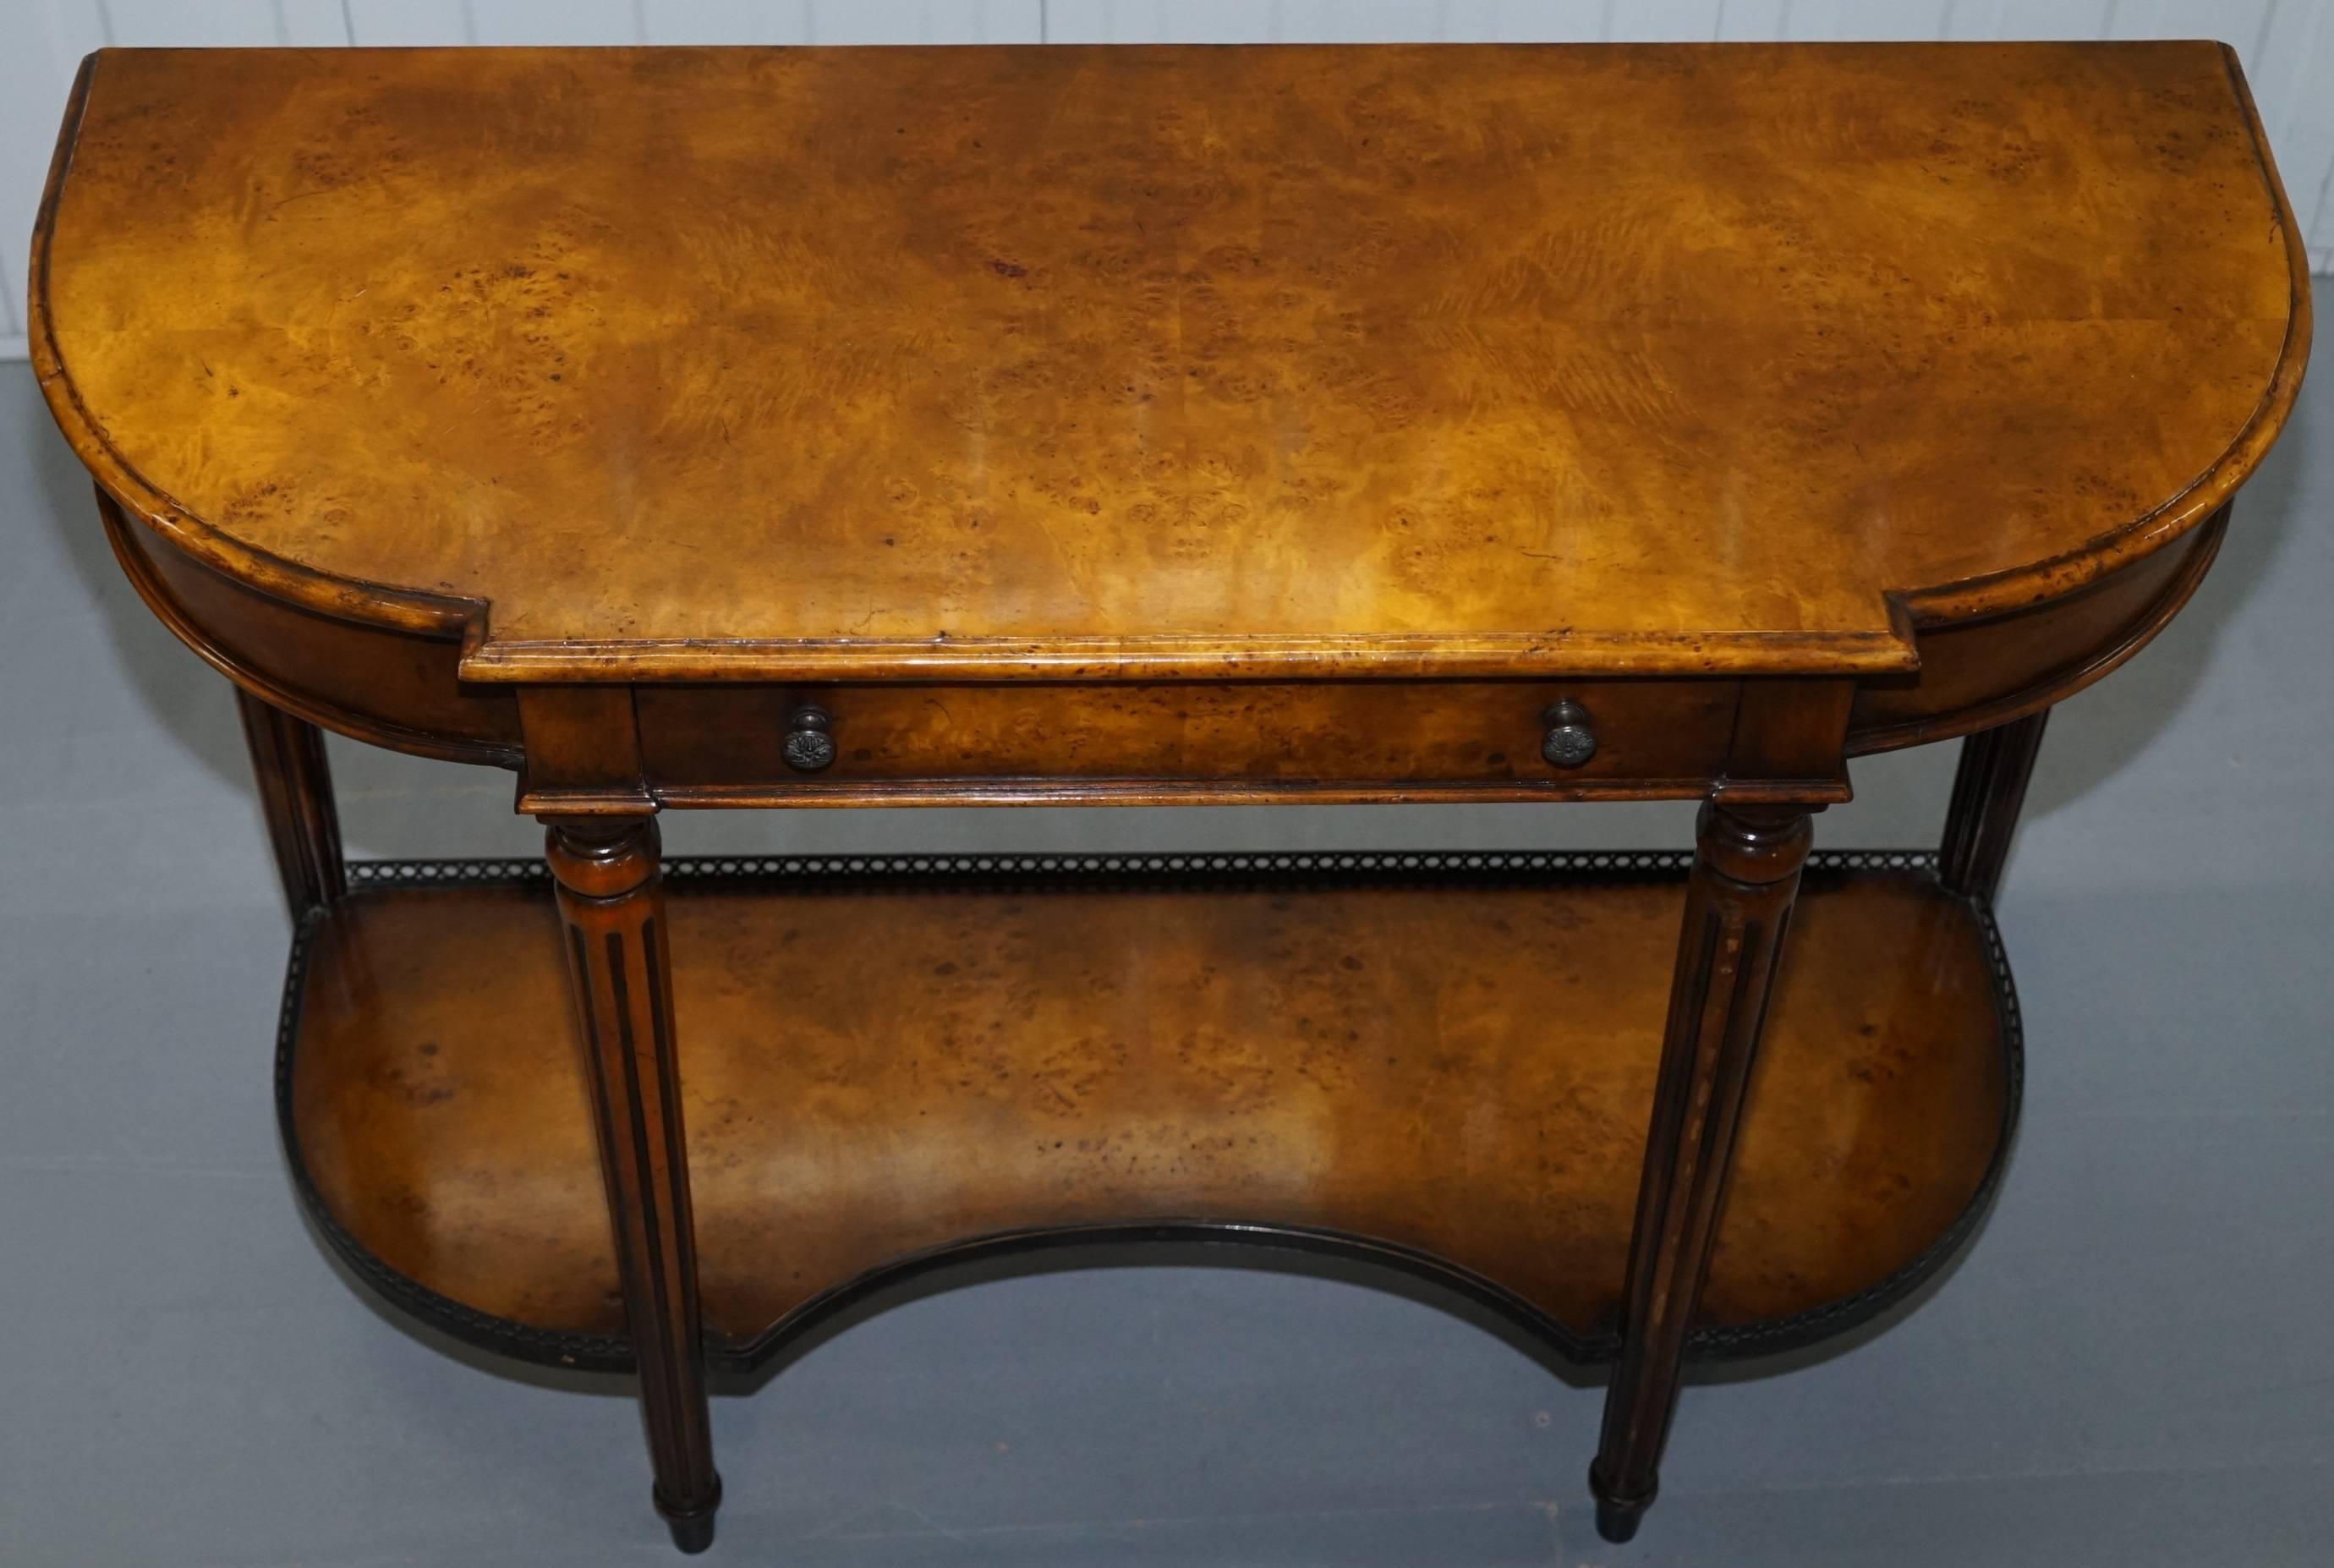 Victorian Stunning Burr Walnut Theodore Alexander Console Table with Single Drawers